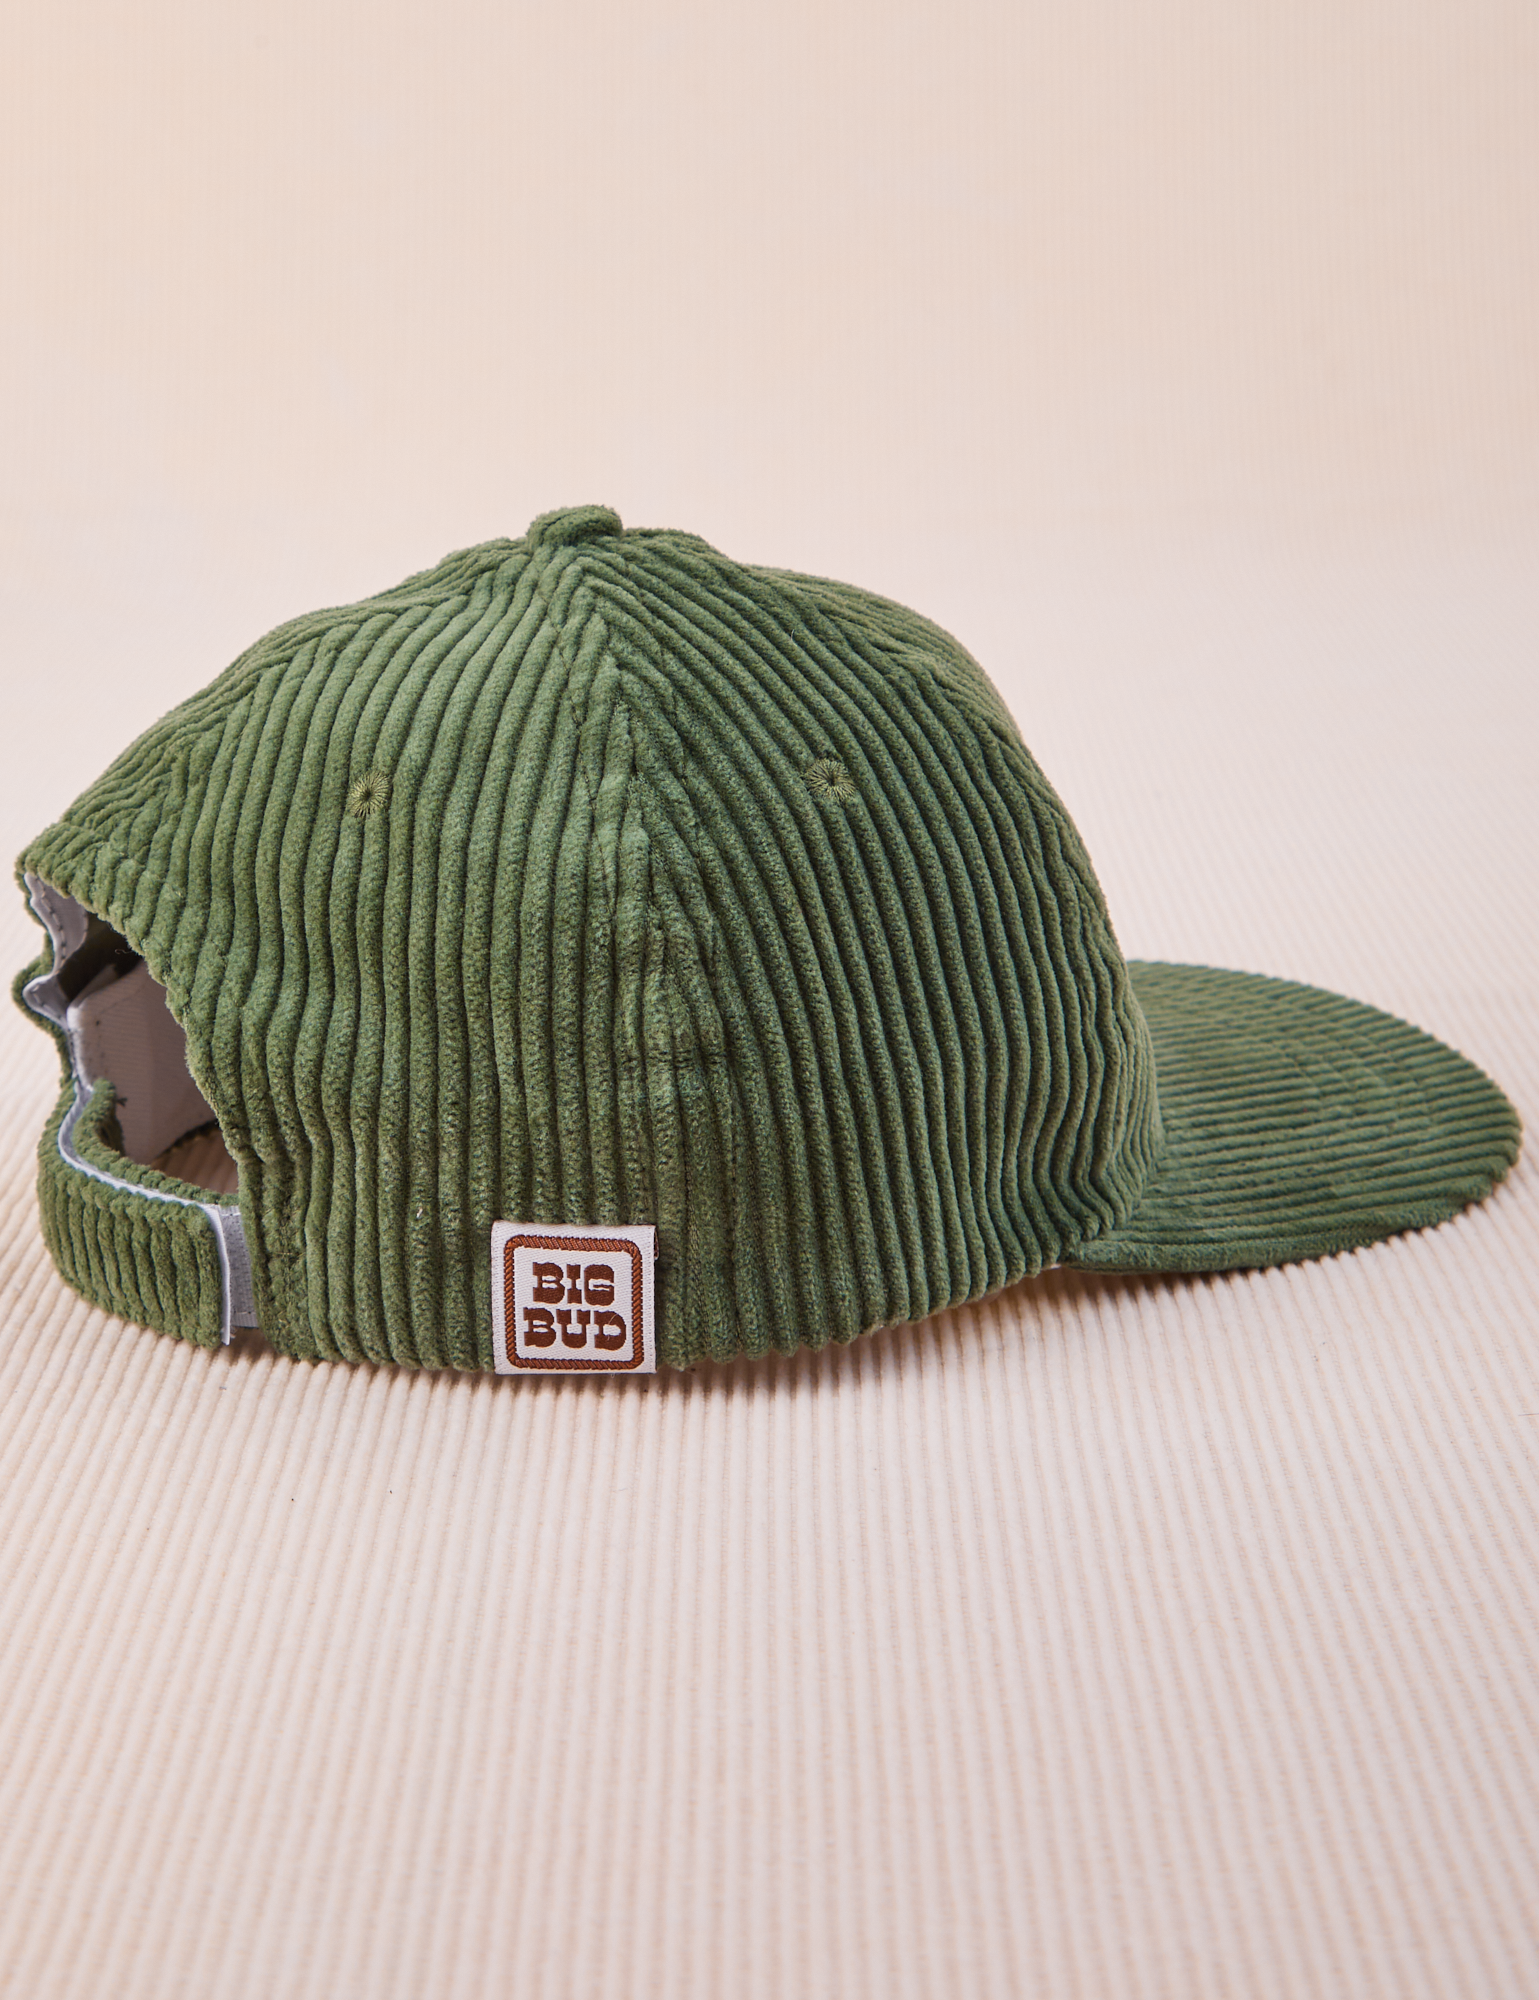 Side view of Dugout Corduroy Hat in Emerald Green. Big Bud label sewn on edge of hat.